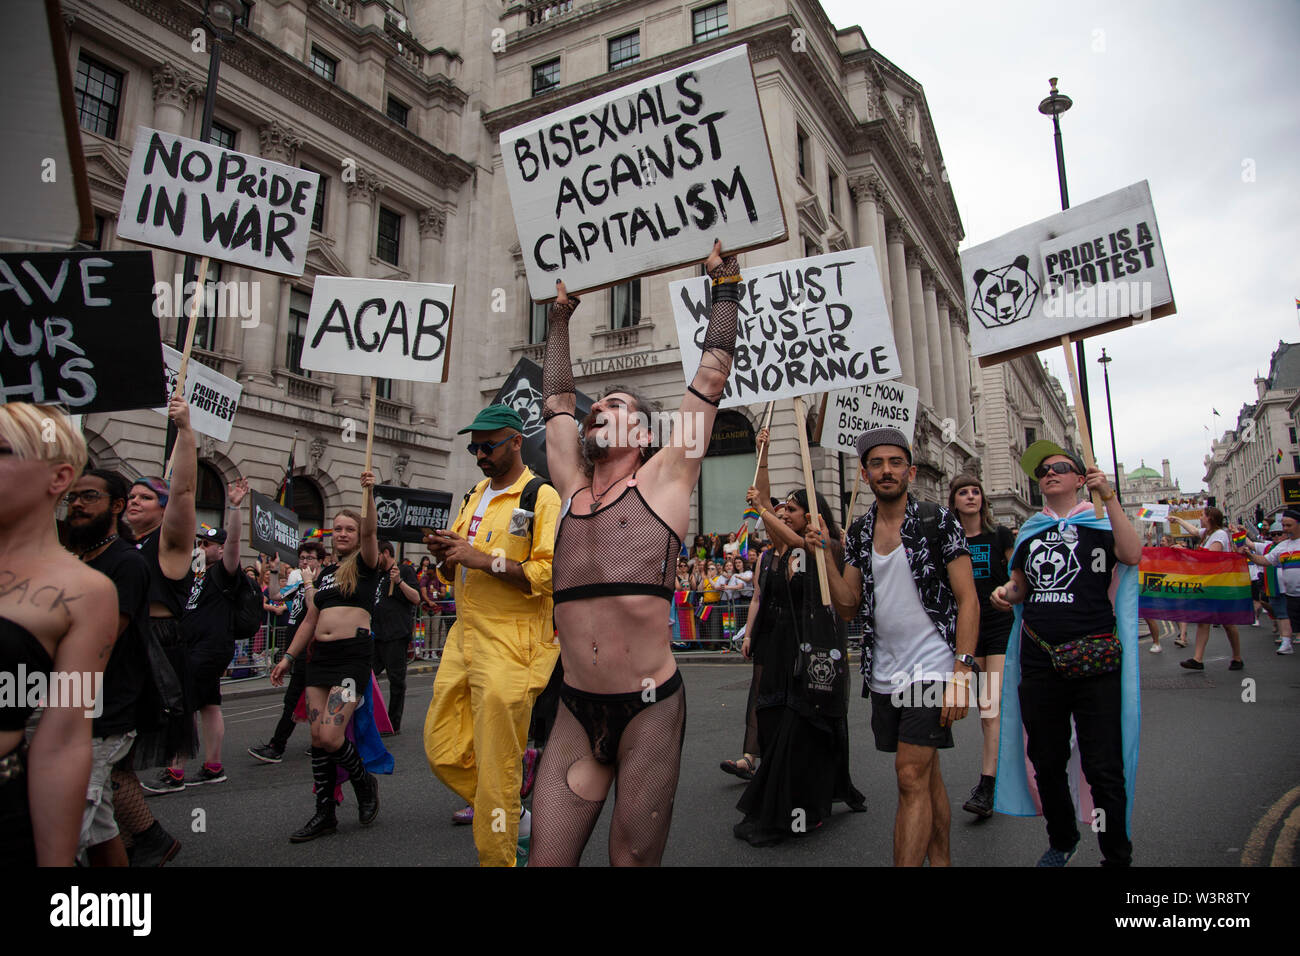 LONDON, UK - July 6th 2019: Participants at the annual gay pride march in central London Stock Photo